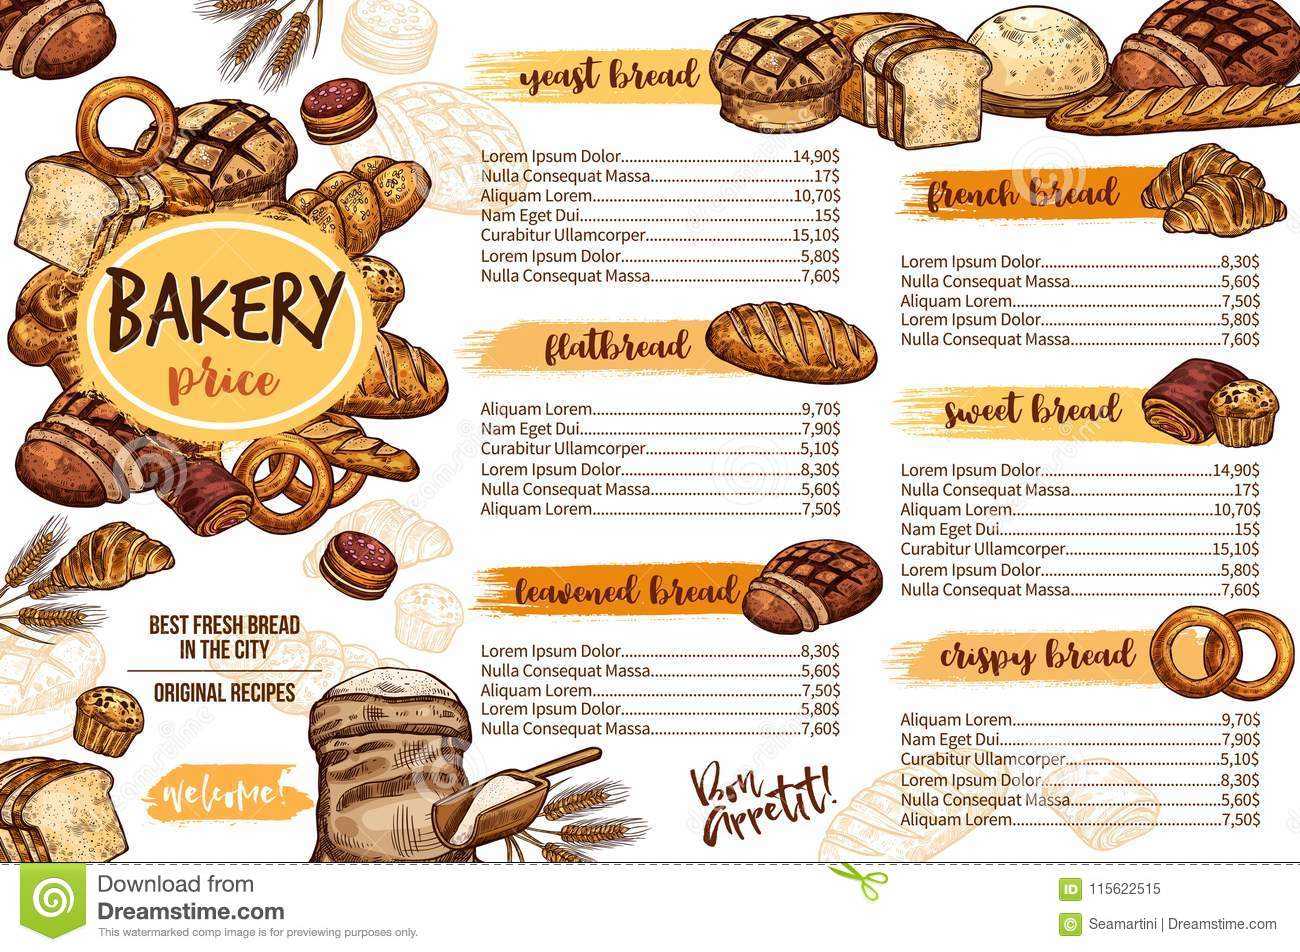 Bakery Menu Template Of Bread For Cafe And Pastry Stock In Free Bakery Menu Templates Download